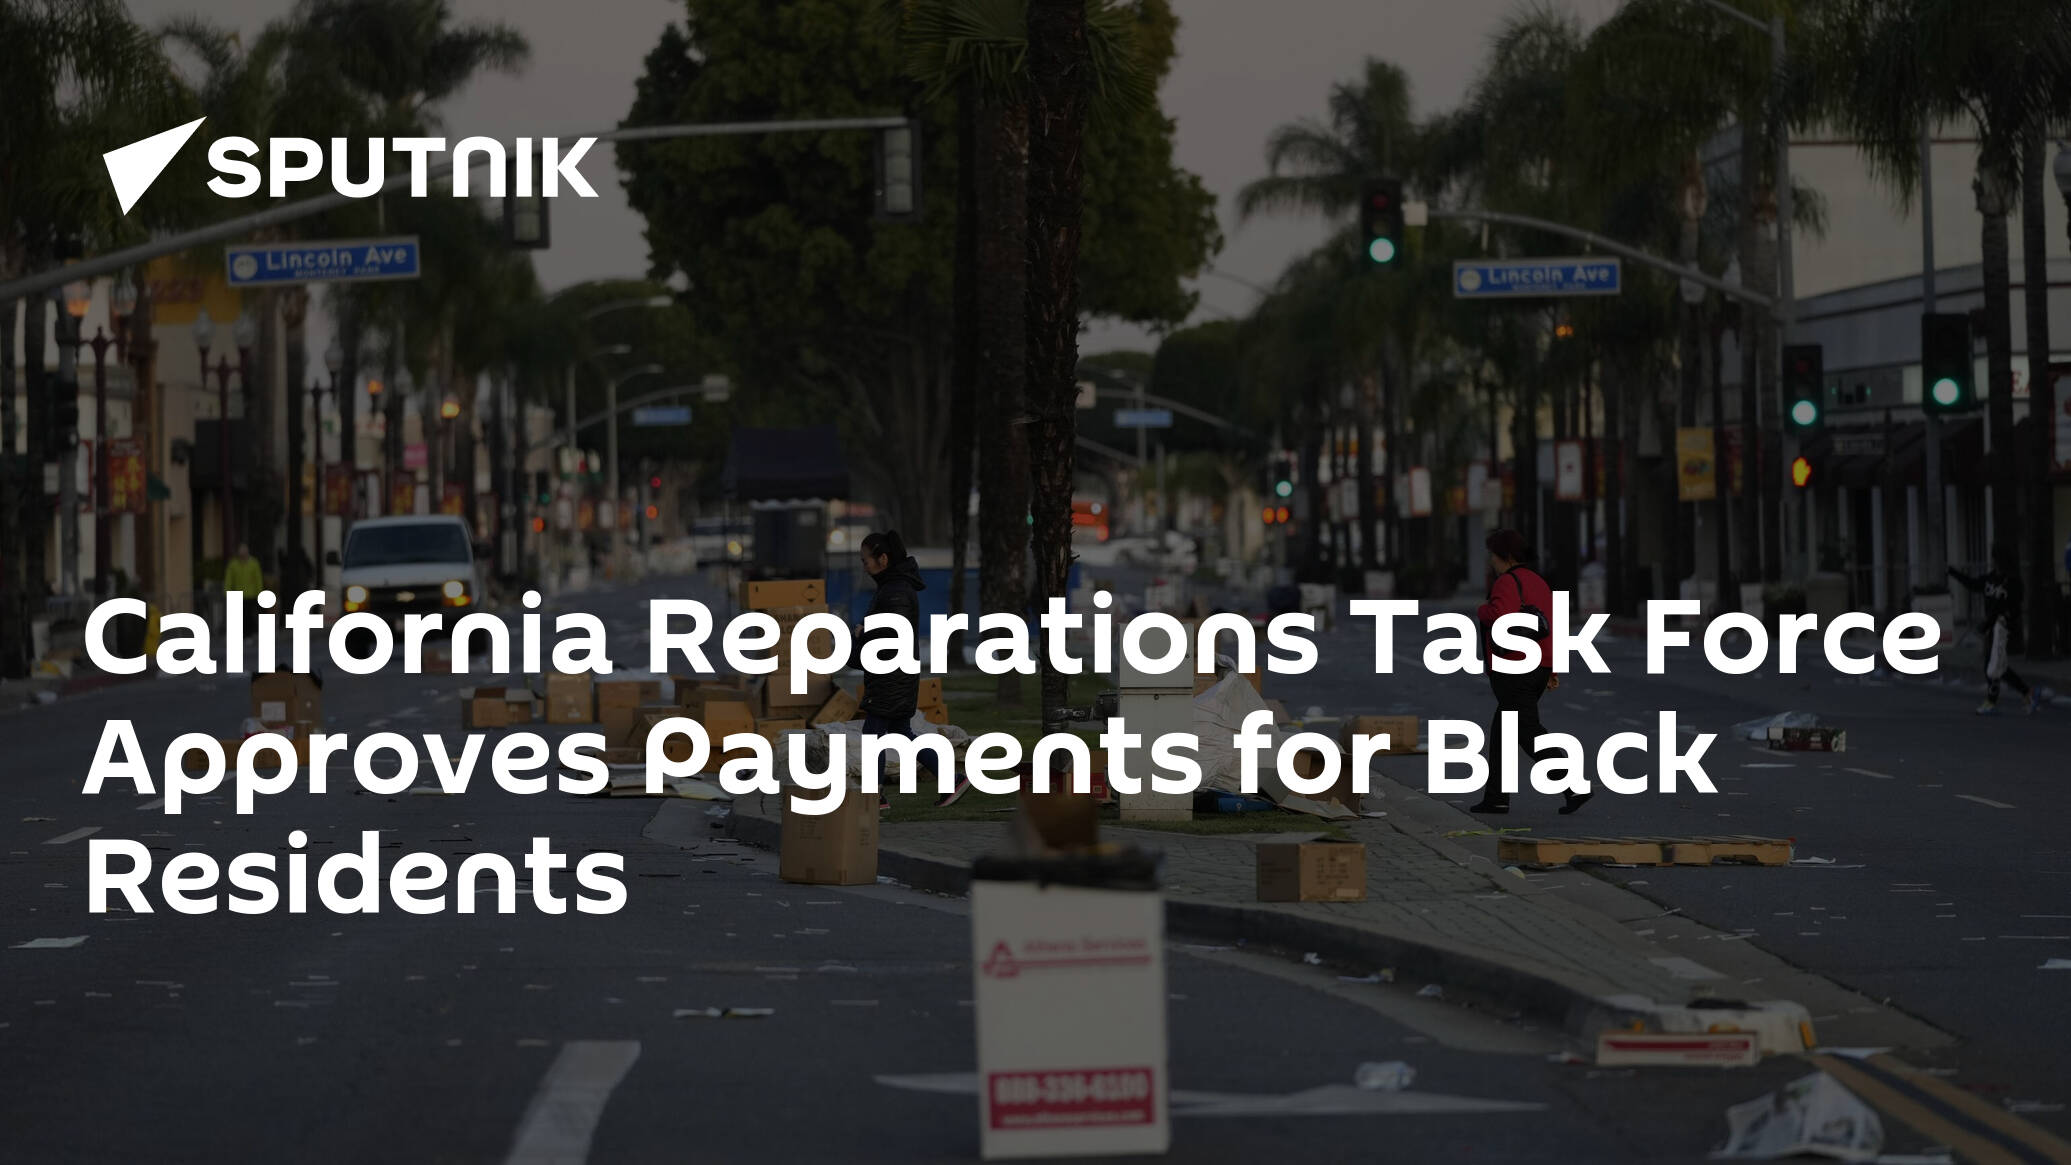 California Reparations Task Force Approves Payments for Black Residents